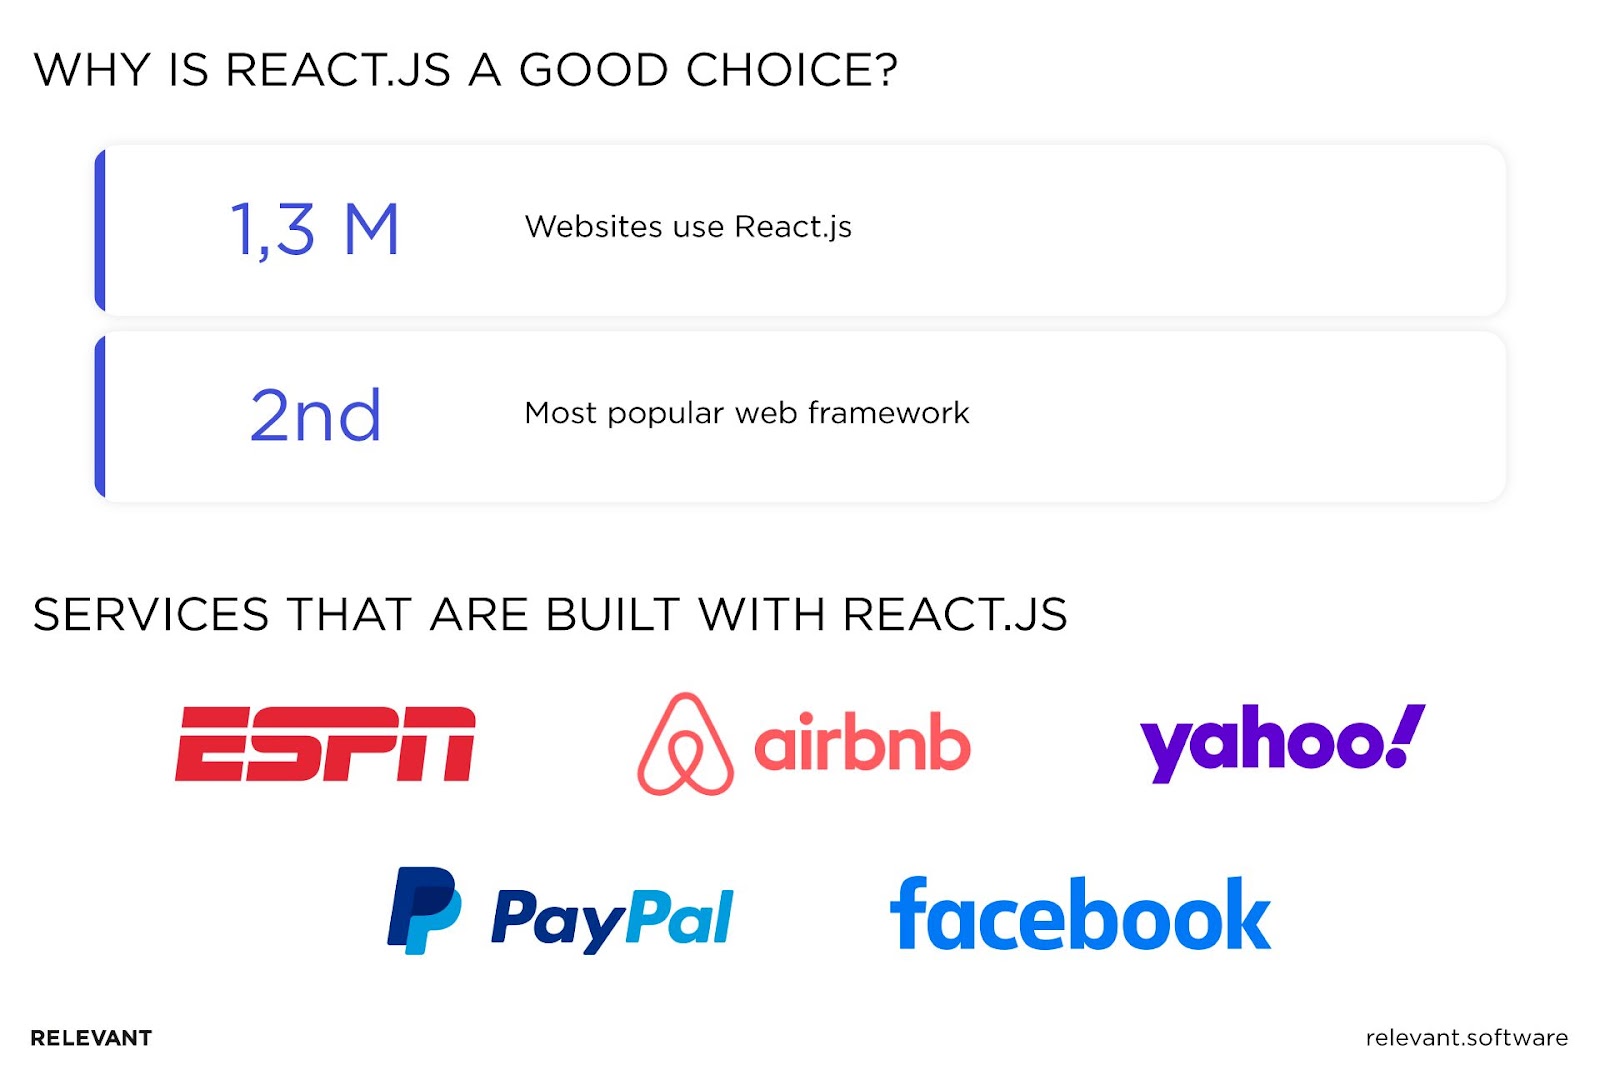 Why Is React.js a Good Choice?